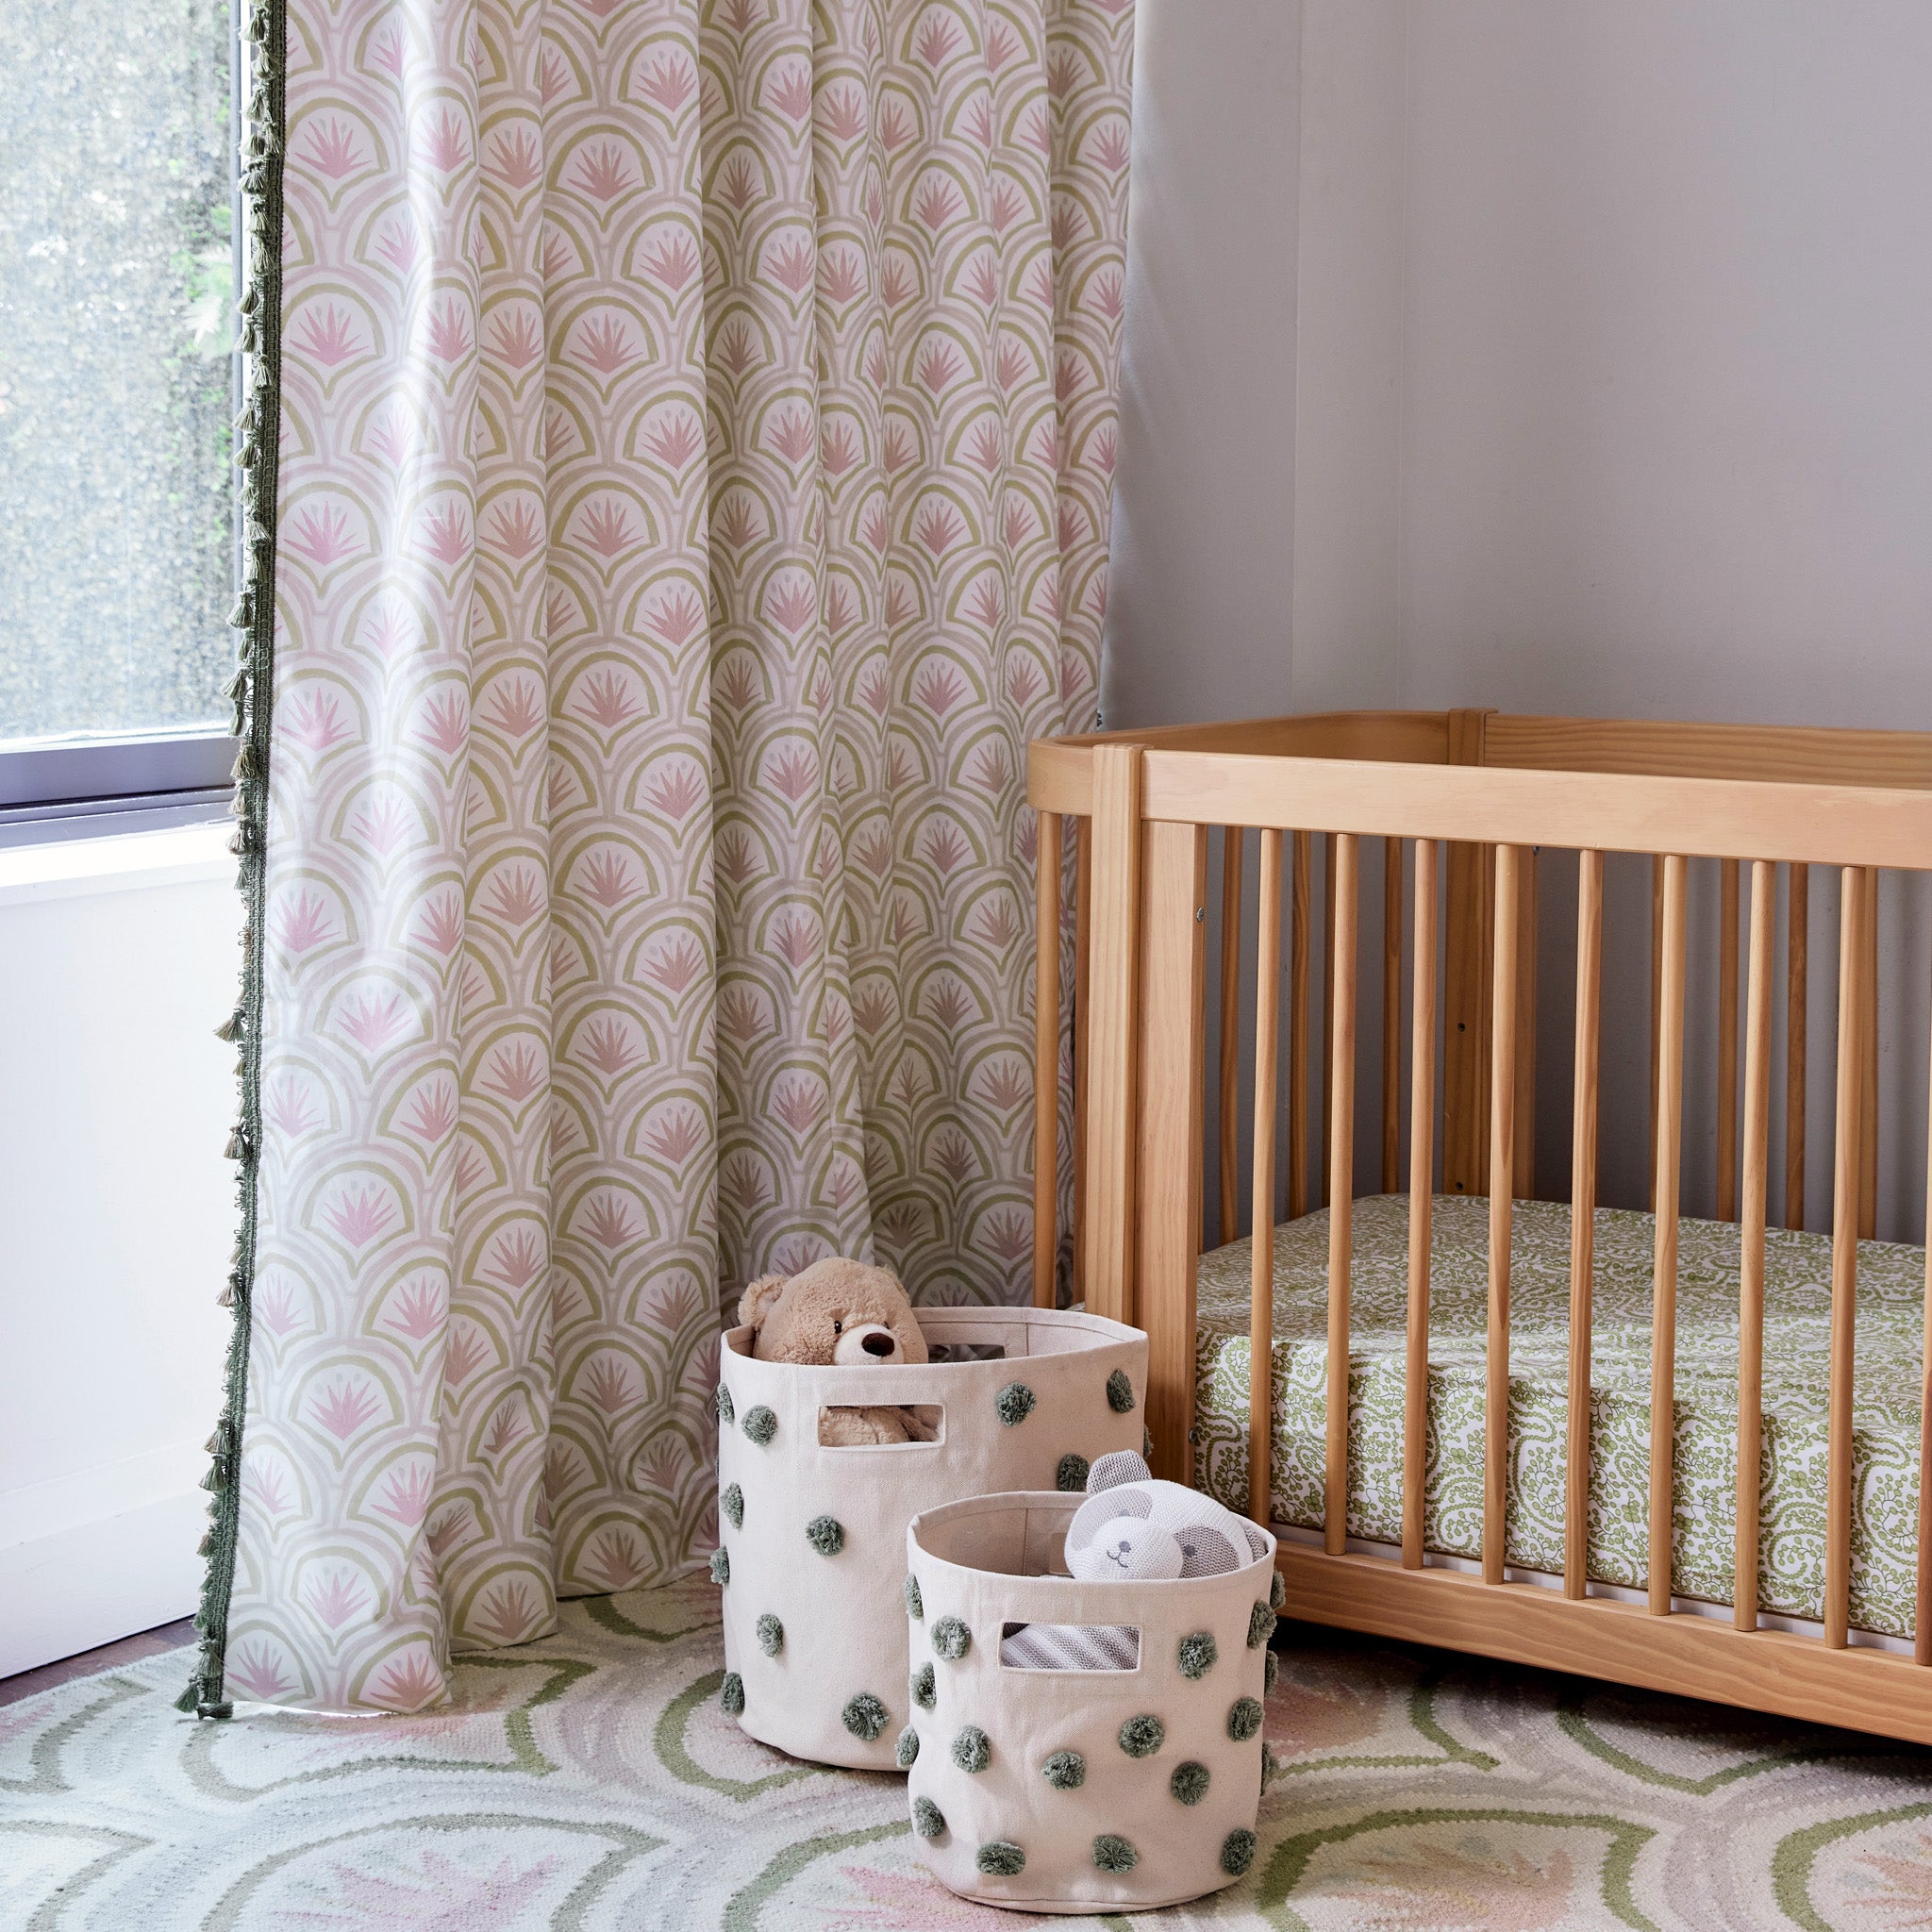 Nursery room corner styled with Pink Art Deco Palm Printed Curtains next to wooden crib and two baskets on floor with teddy bears in them over a Pink Art Deco Palm Printed Rug